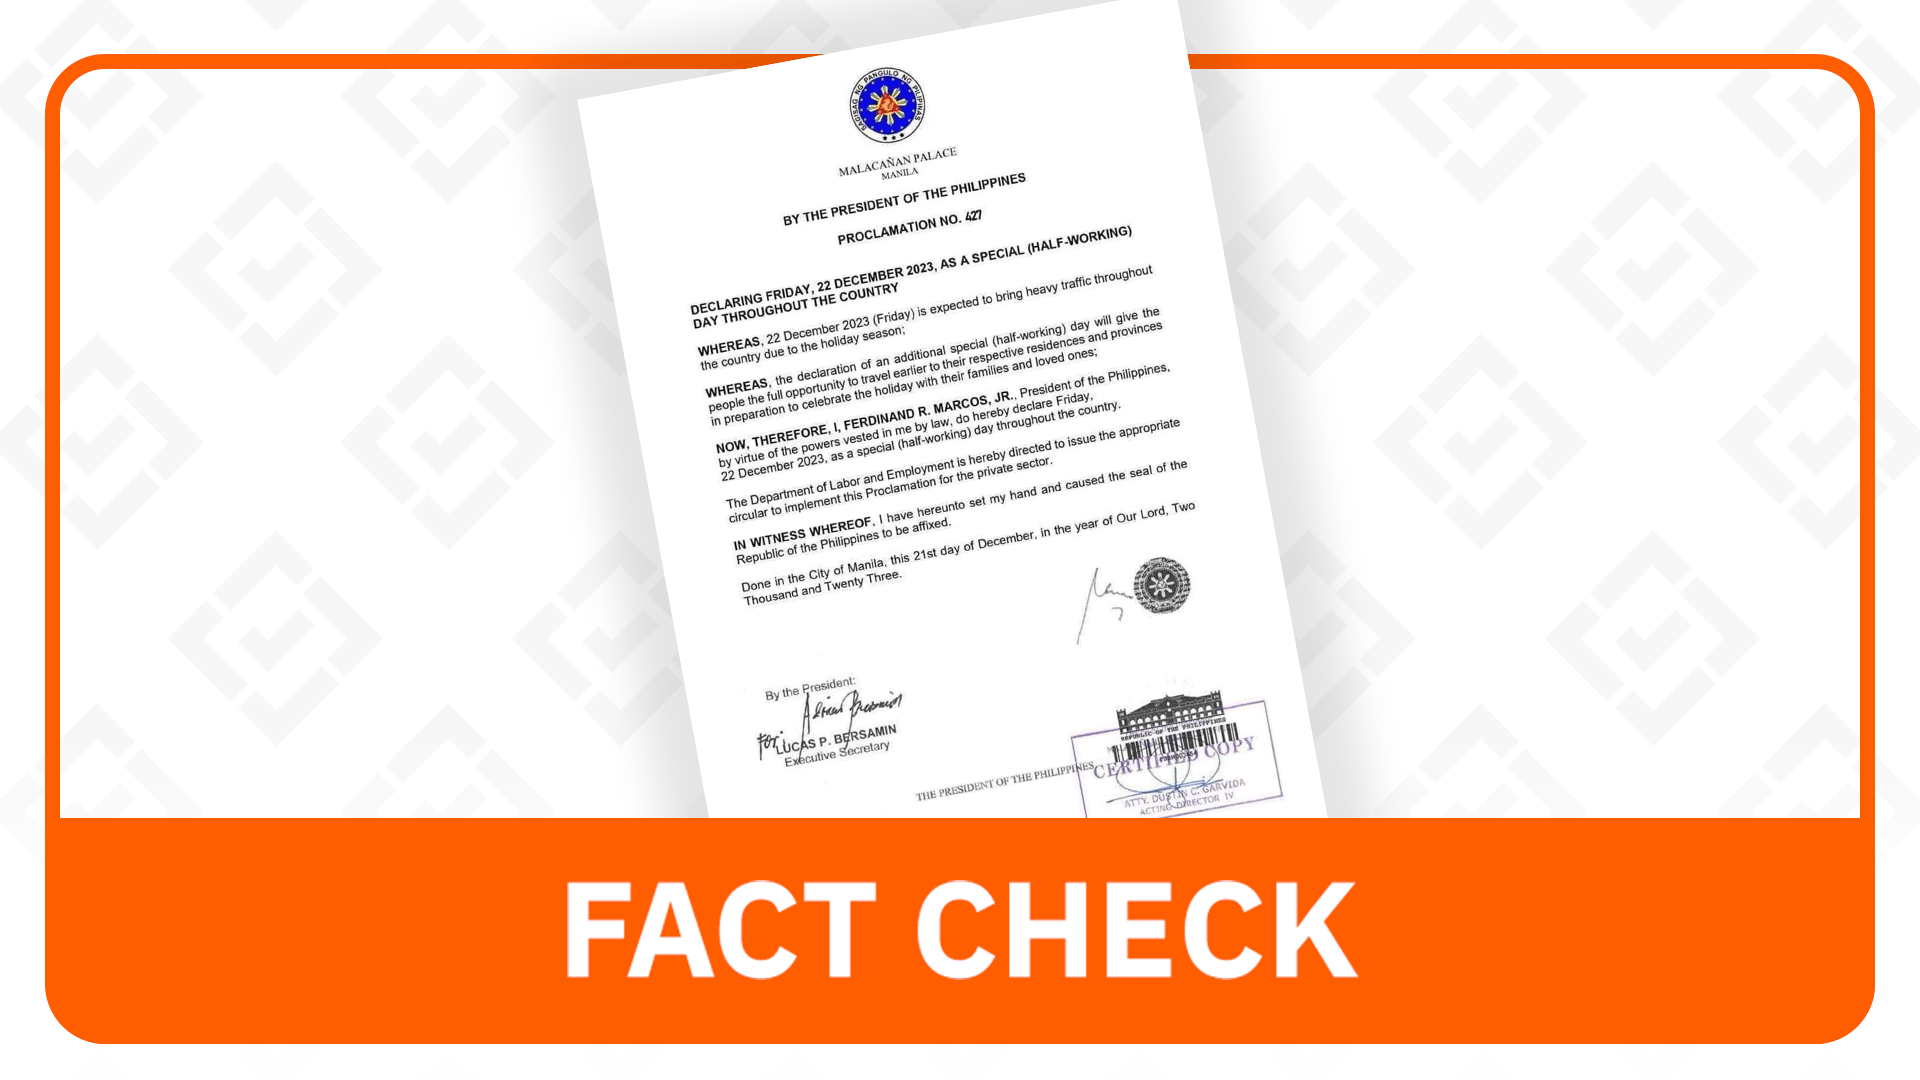 FACT CHECK: No Palace proclamation on December 22 as half-working day